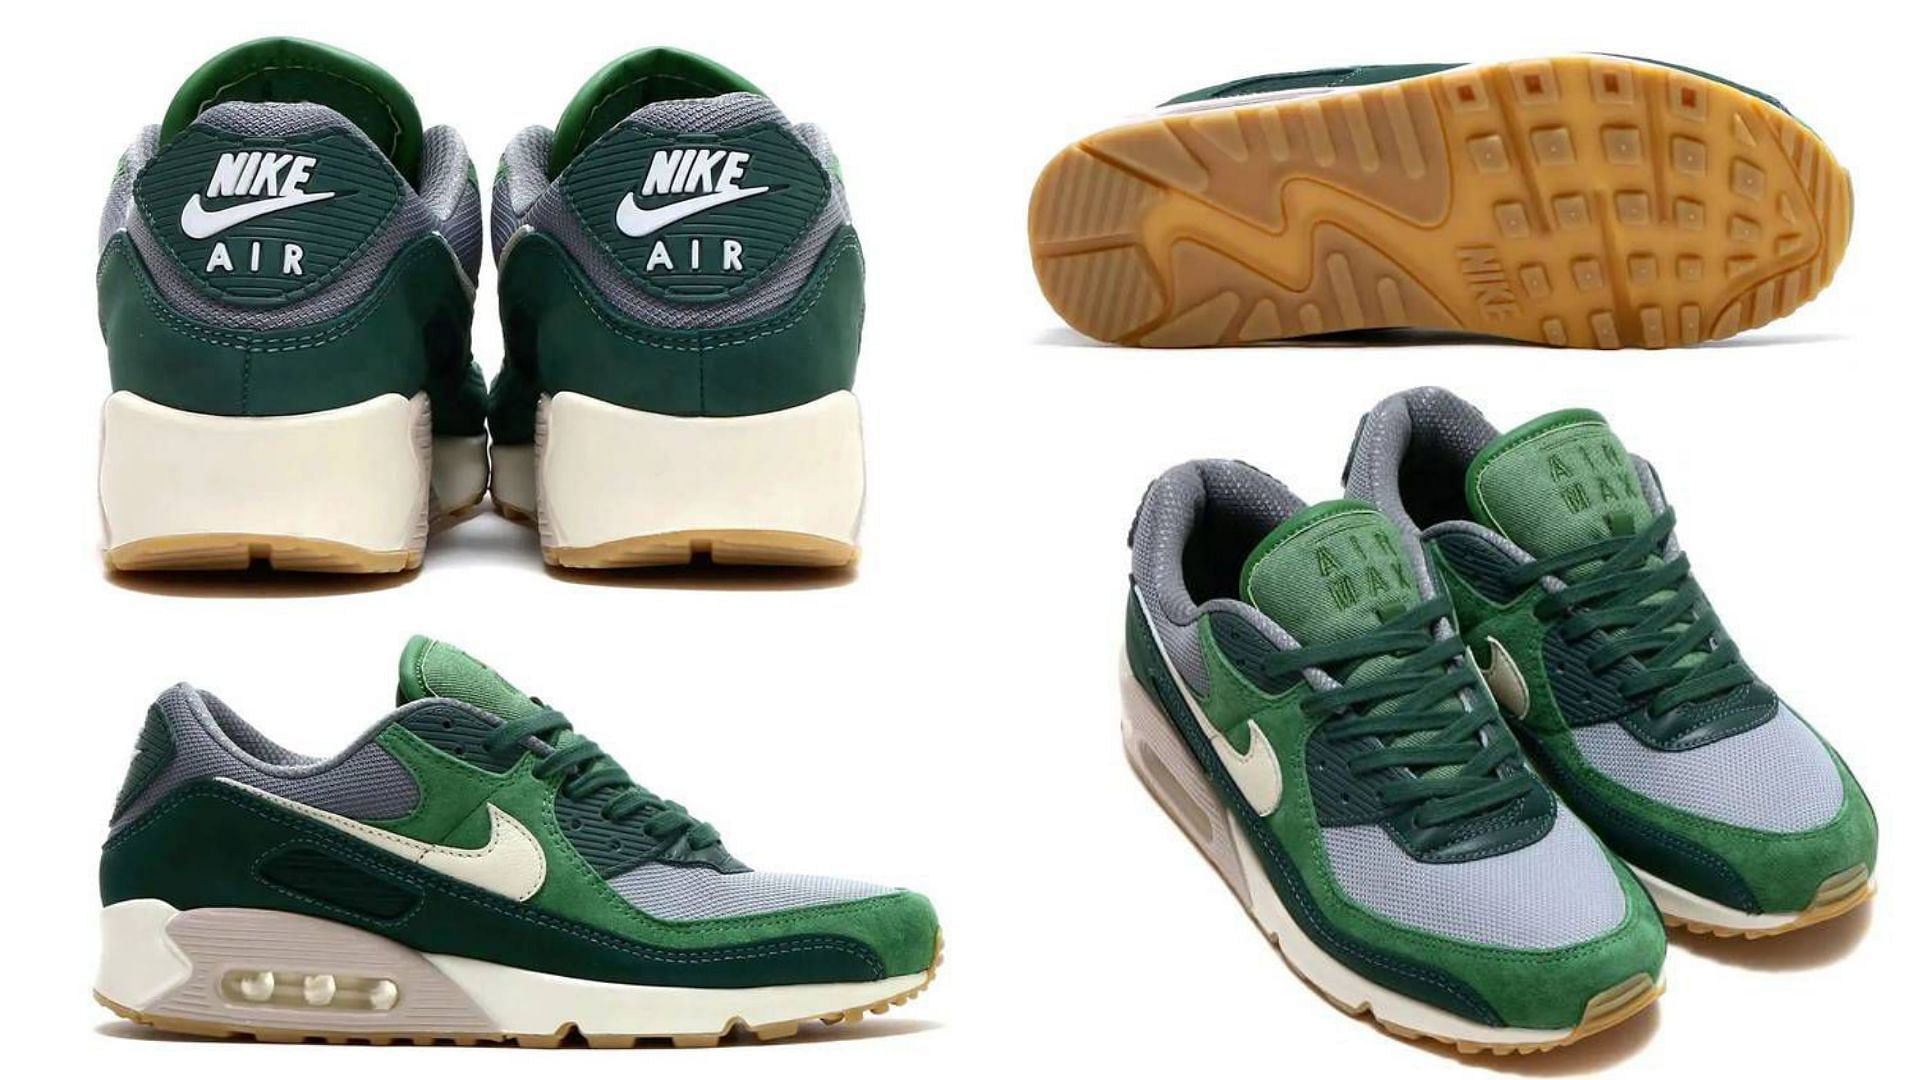 Nike recently released its latest Air Max 90 Pro Green shoes (Image via Sportskeeda)